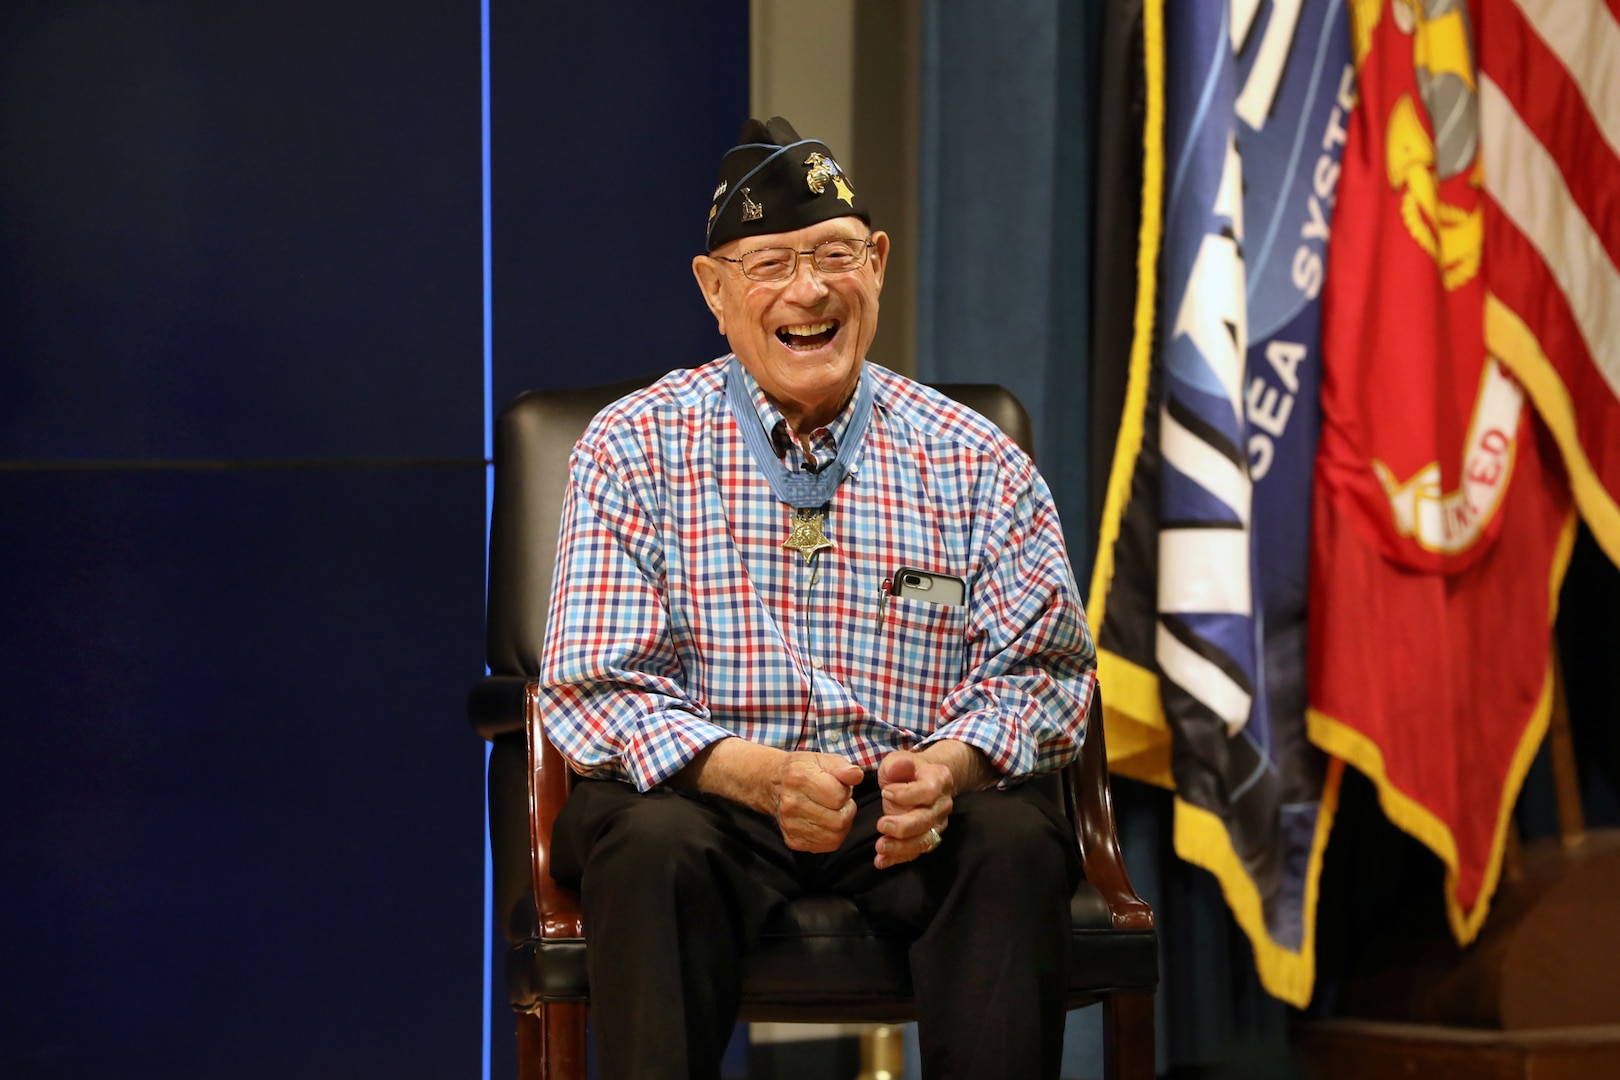 Marine Corps Medal of Honor recipient from Iwo Jima, Hershel "Woody" Williams, spoke to a at NAVSEA headquarters today. Hershel ‘Woody’ Williams received the military's highest decoration for valor for his heroism during the Battle of Iwo Jima in World War II.